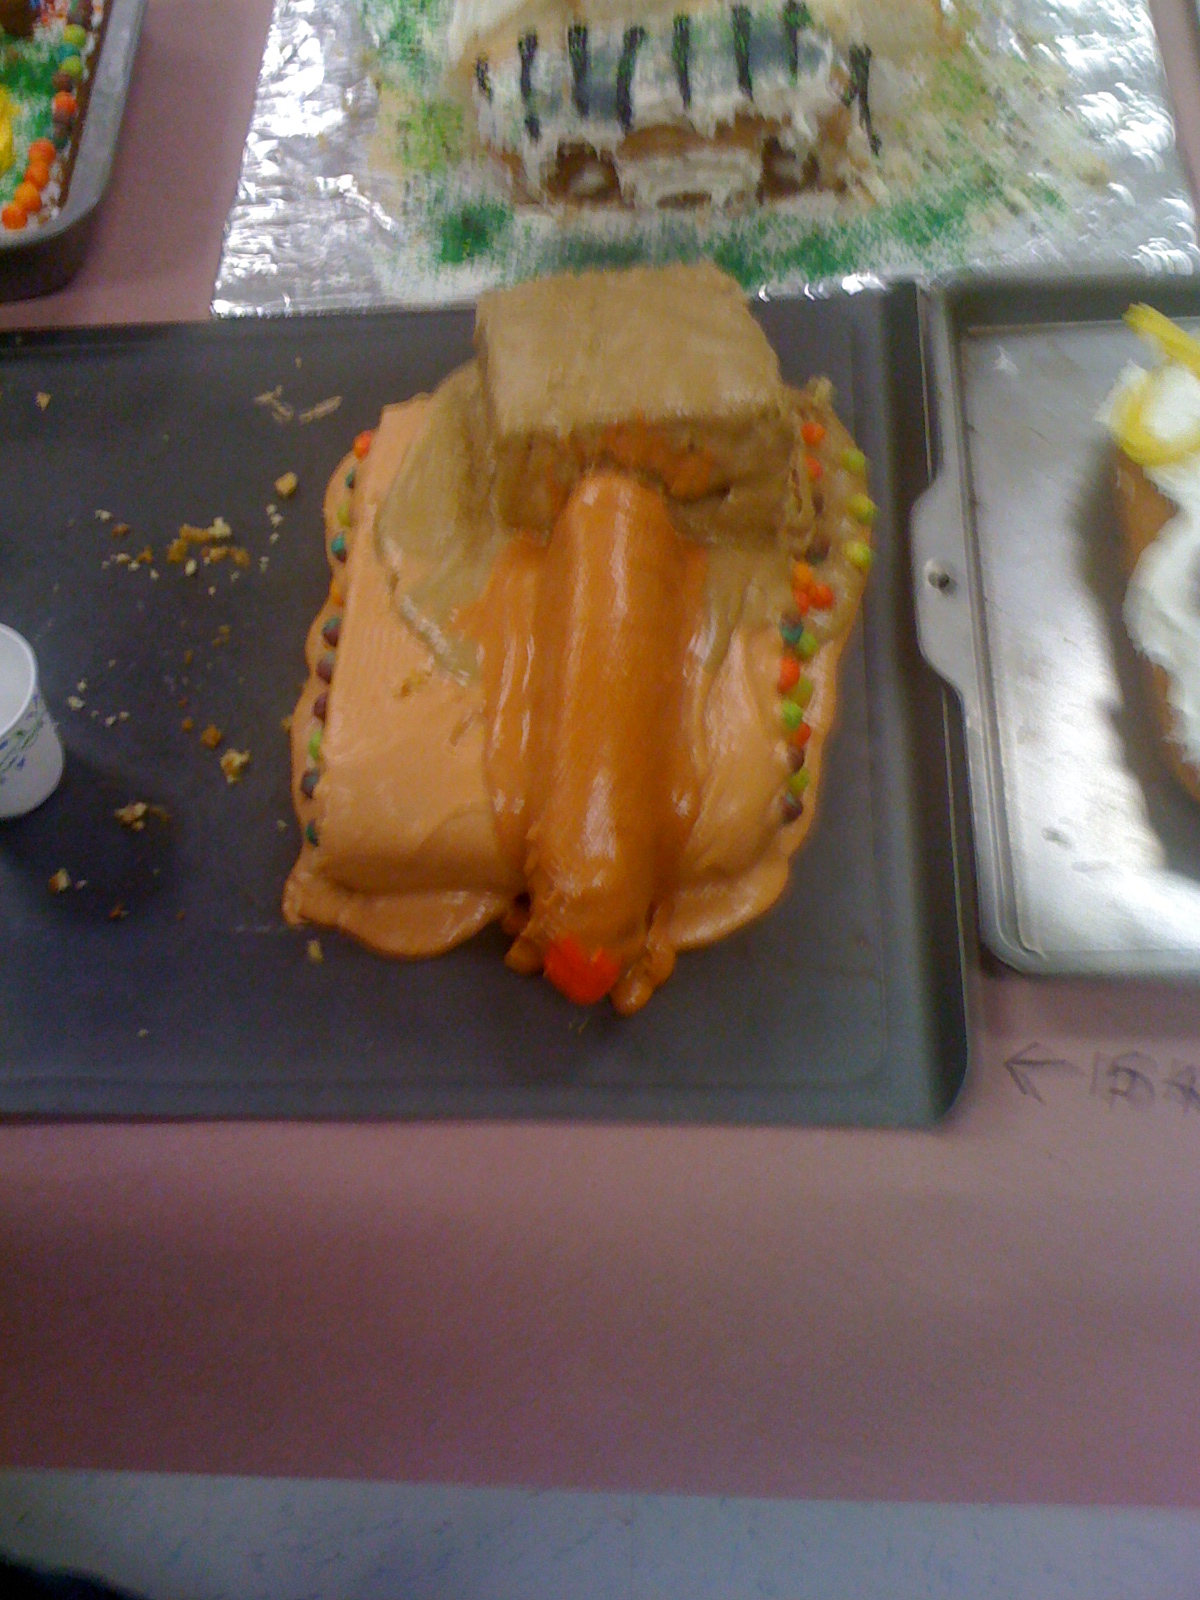 this was a submission in the iron chef cake bake for a cub pack. It was supposed to be a tank.